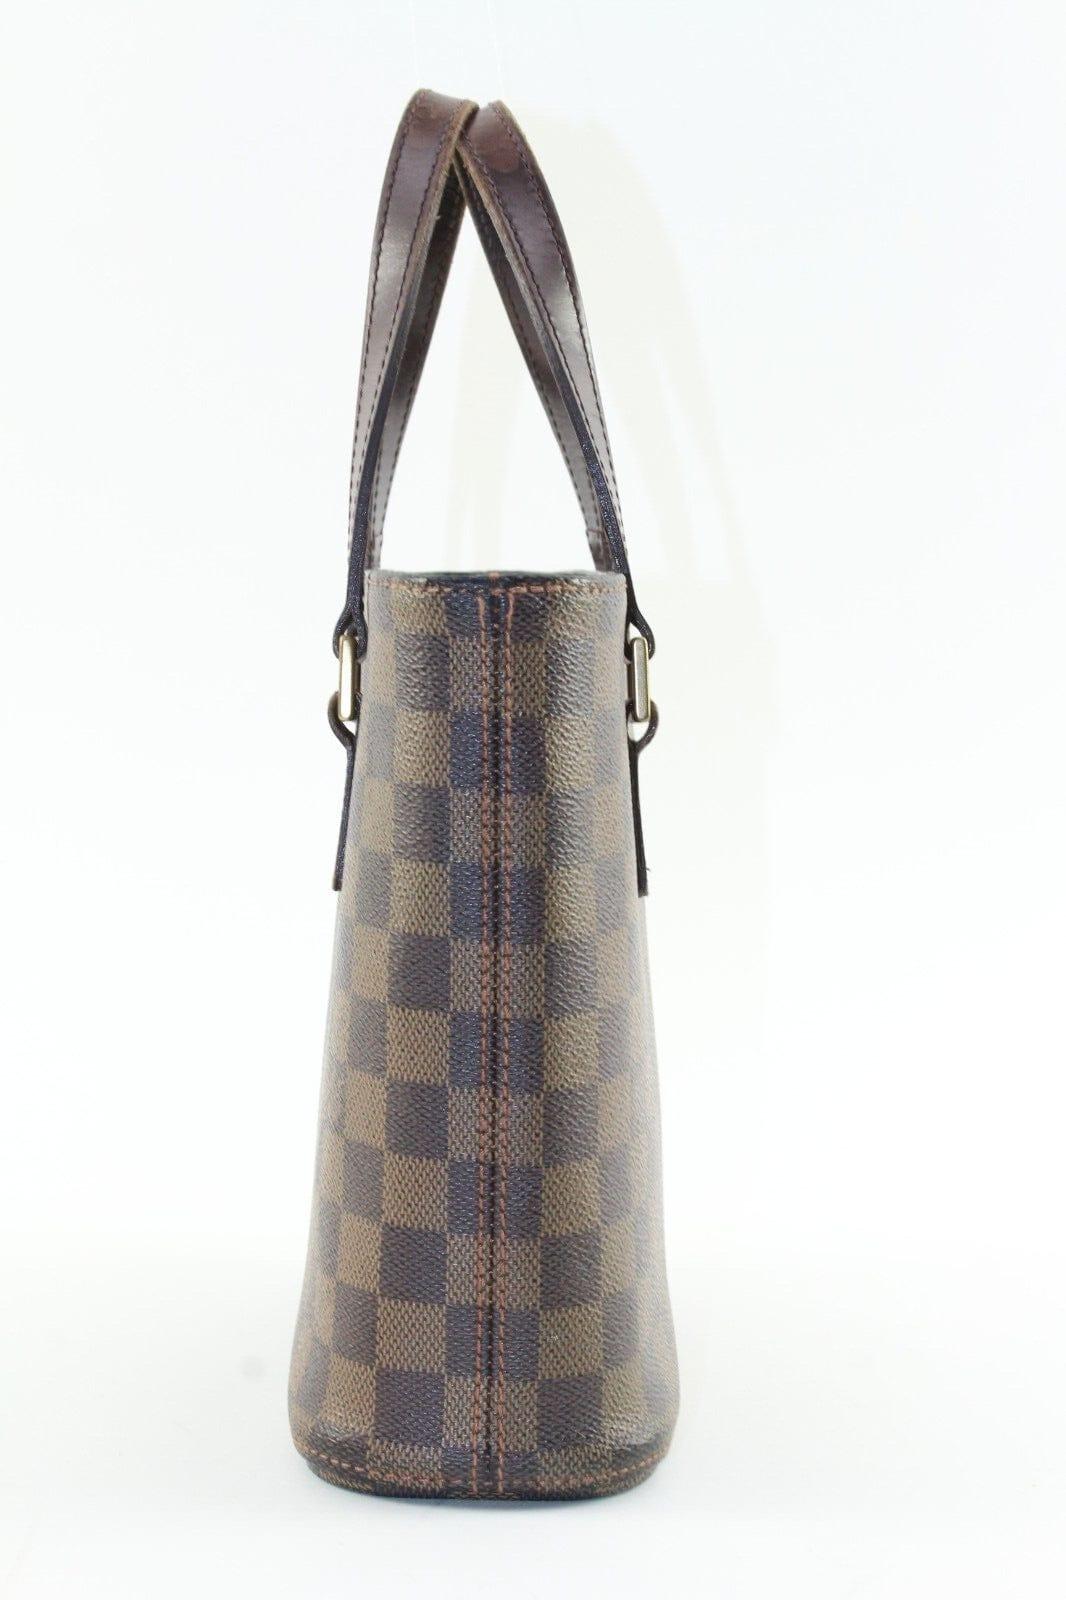 LOUIS VUITTON DAMIER EBENE Vavin PM SPECIAL ORDER TOTE 3LV1222K In Fair Condition For Sale In Dix hills, NY